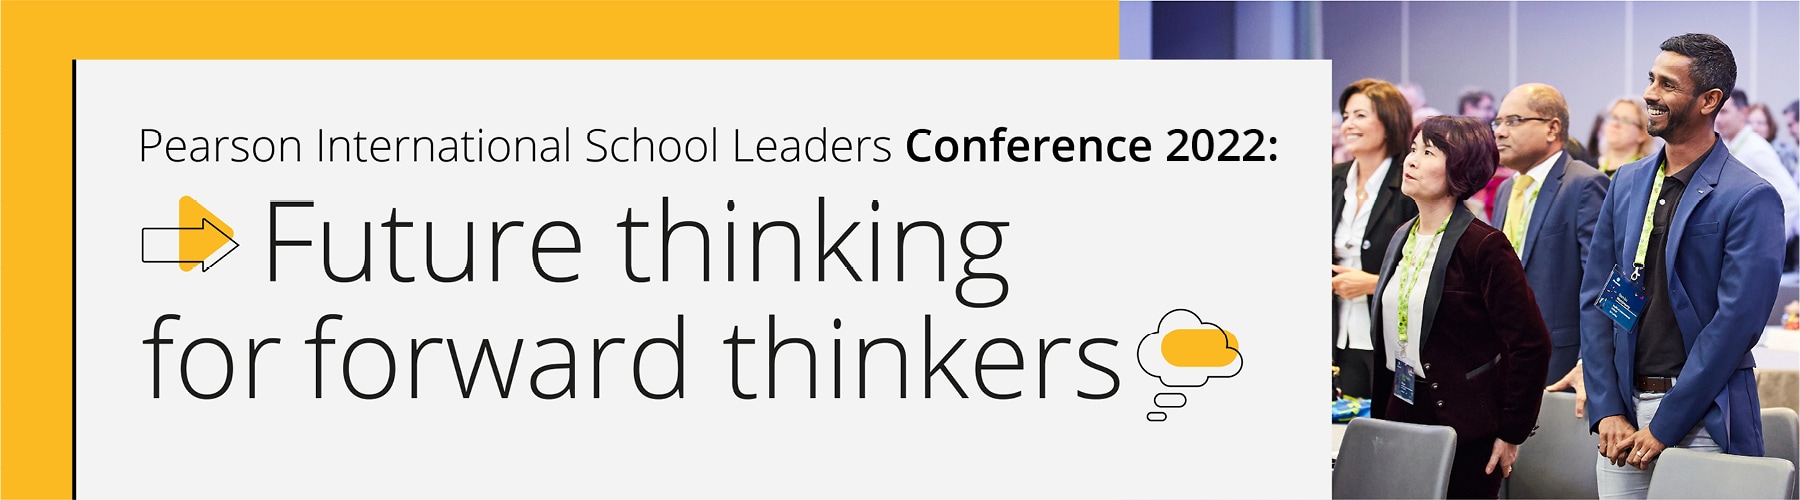 Future thinking for forward thinkers banner